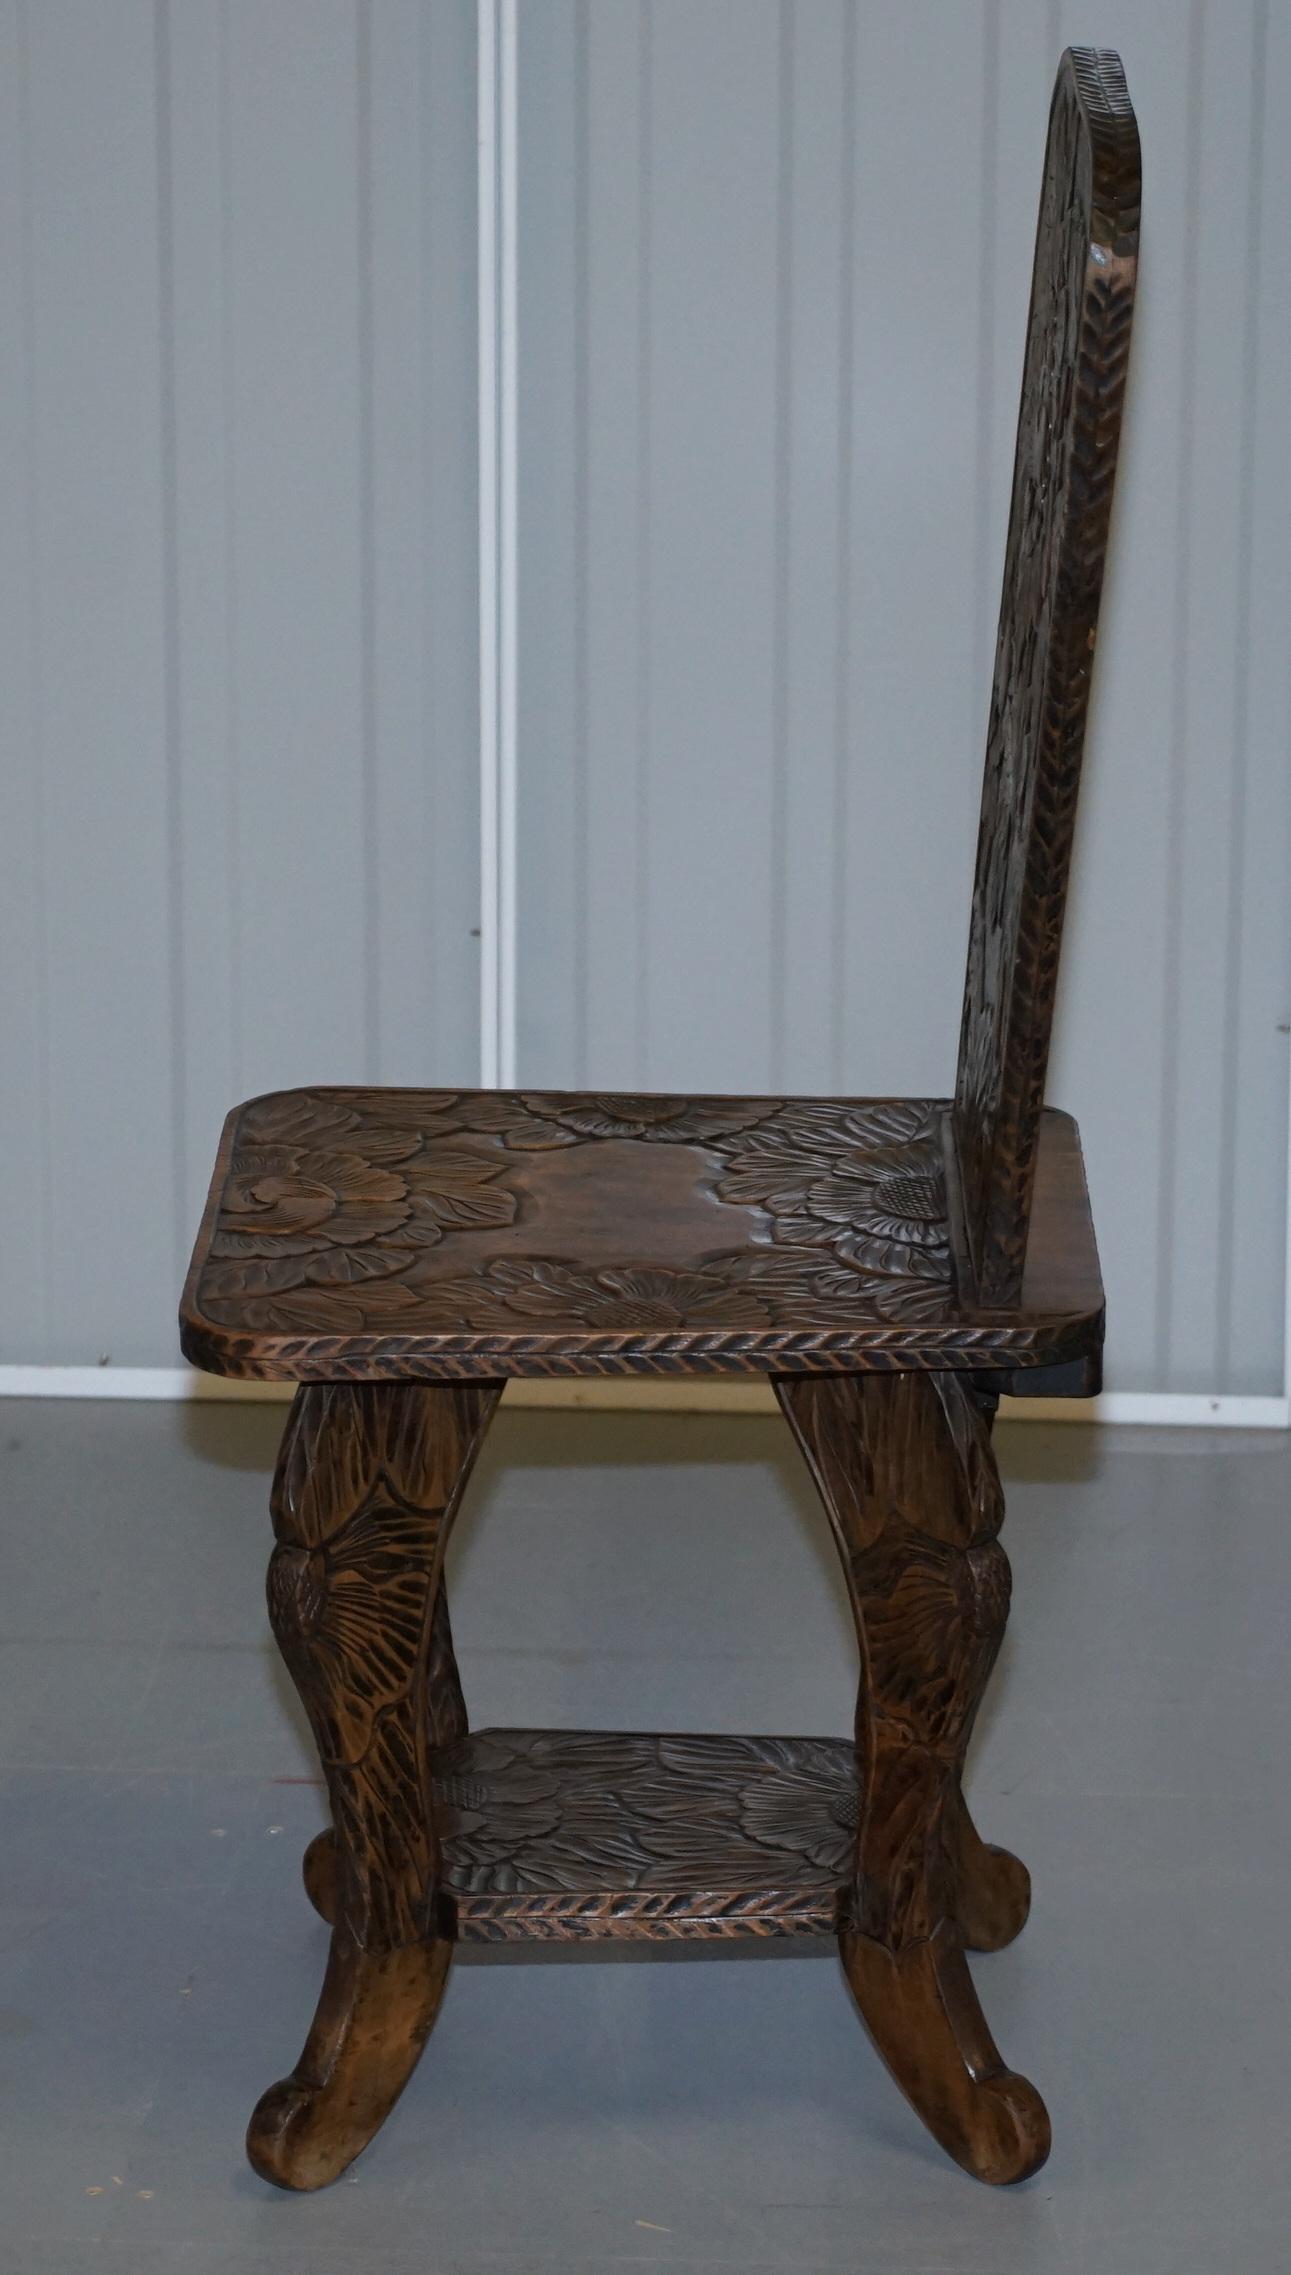 Very Rare Original Liberty's London Signed Qing Dynasty Chair Floral Carving For Sale 8